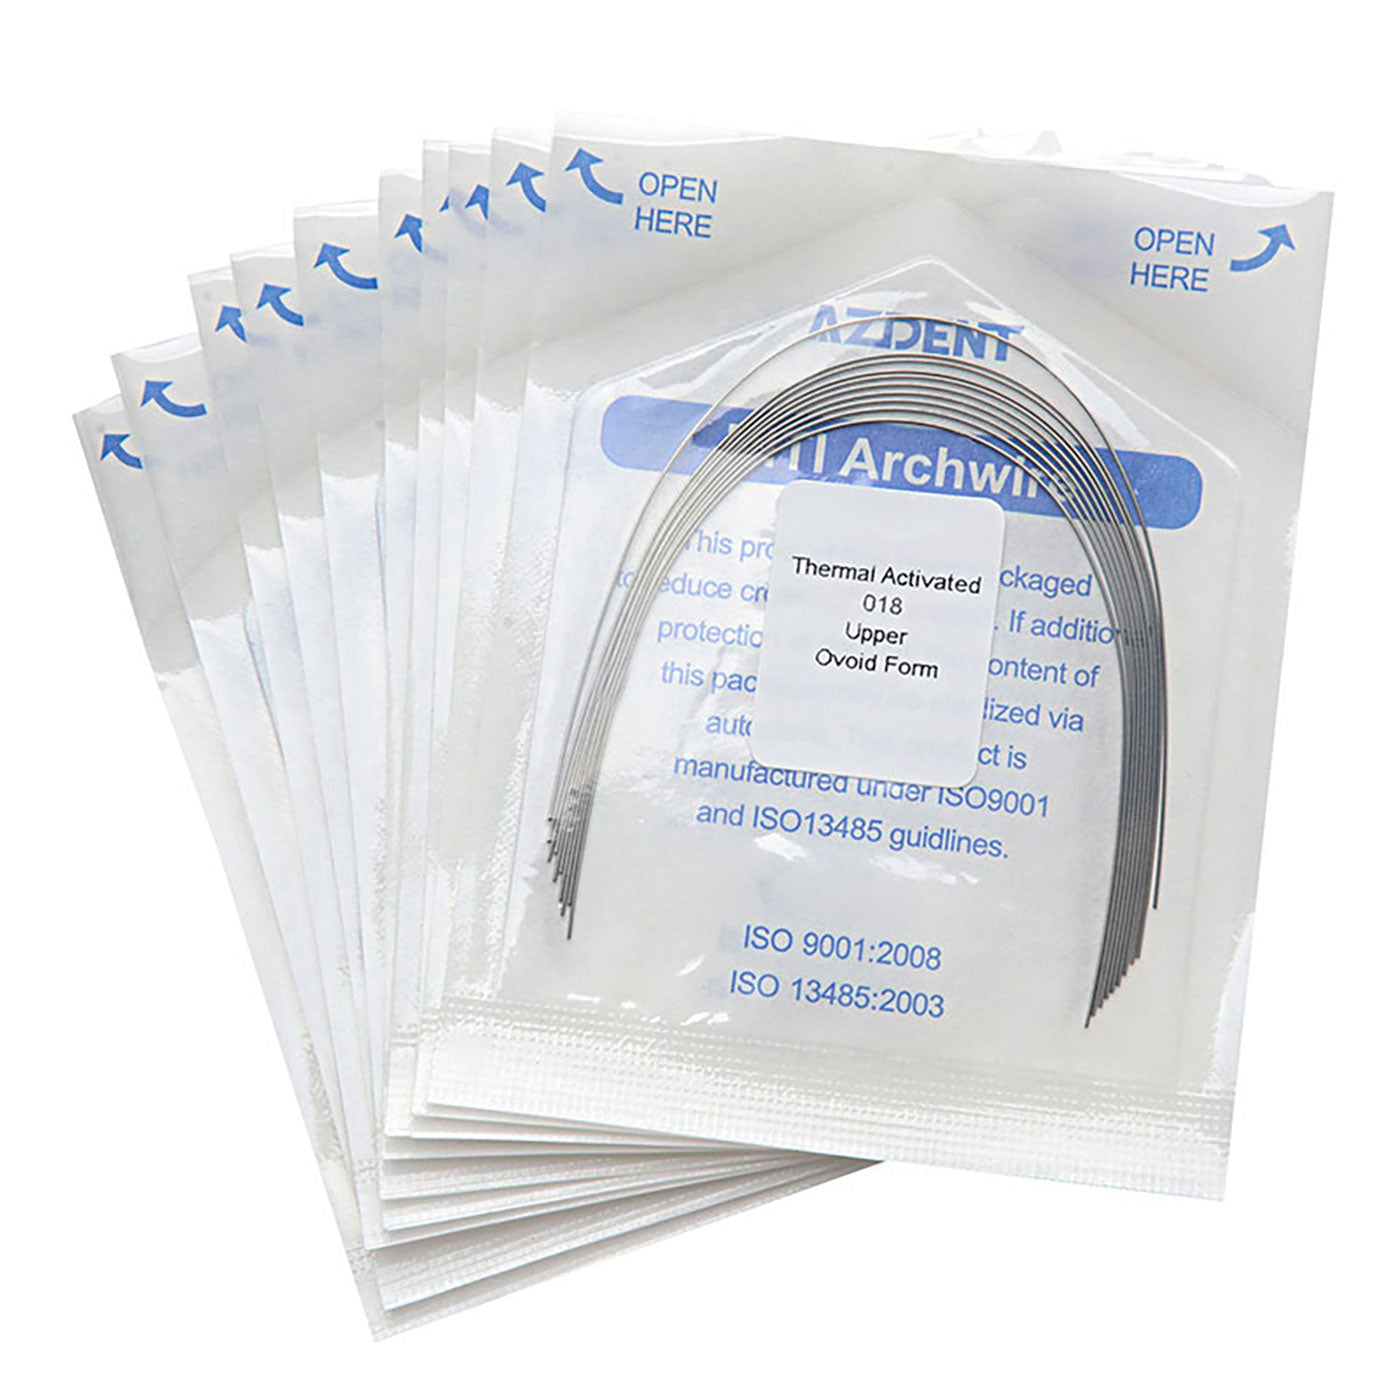 AZDENT Thermal Active NiTi Arch Wire Ovoid Form Round 0.018 Upper 10pcs/Pack - azdentall.com